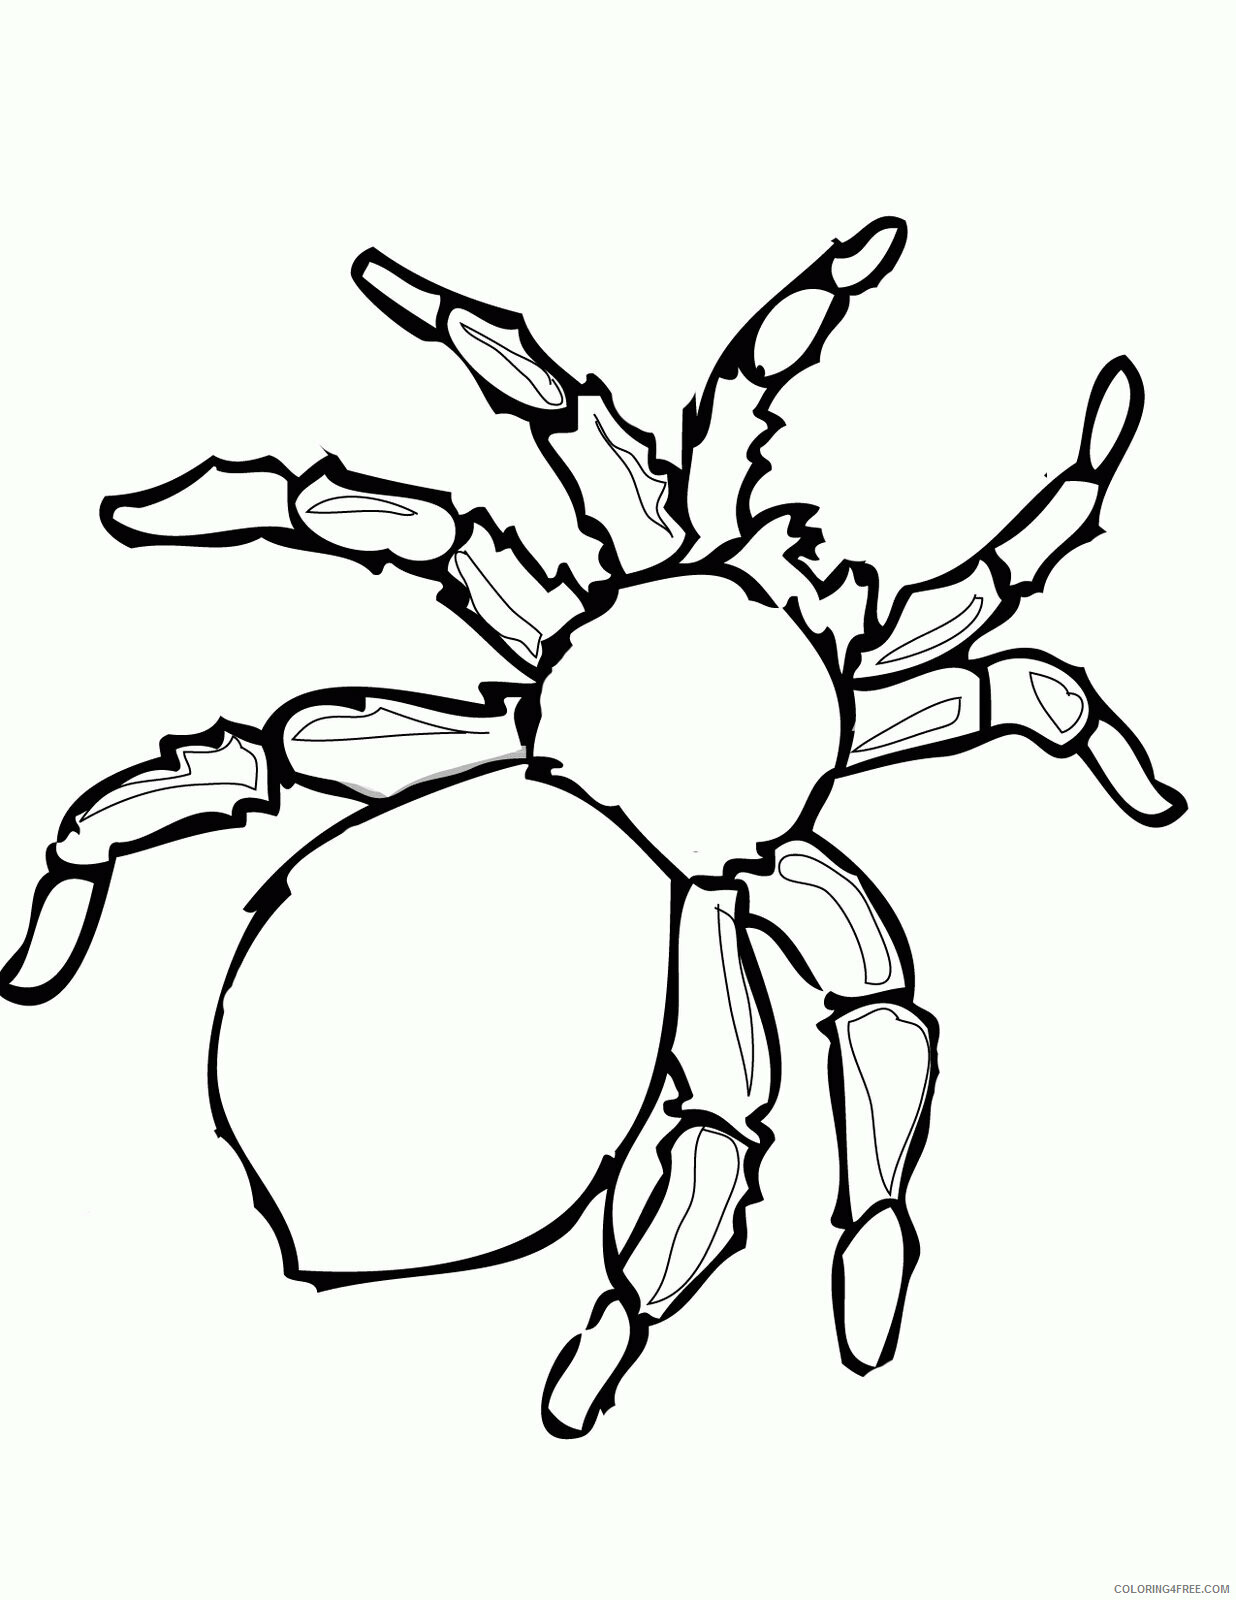 Anansi the Spider Coloring Page Printable Sheets Animal Spider Coloring 2021 a 5735 Coloring4free